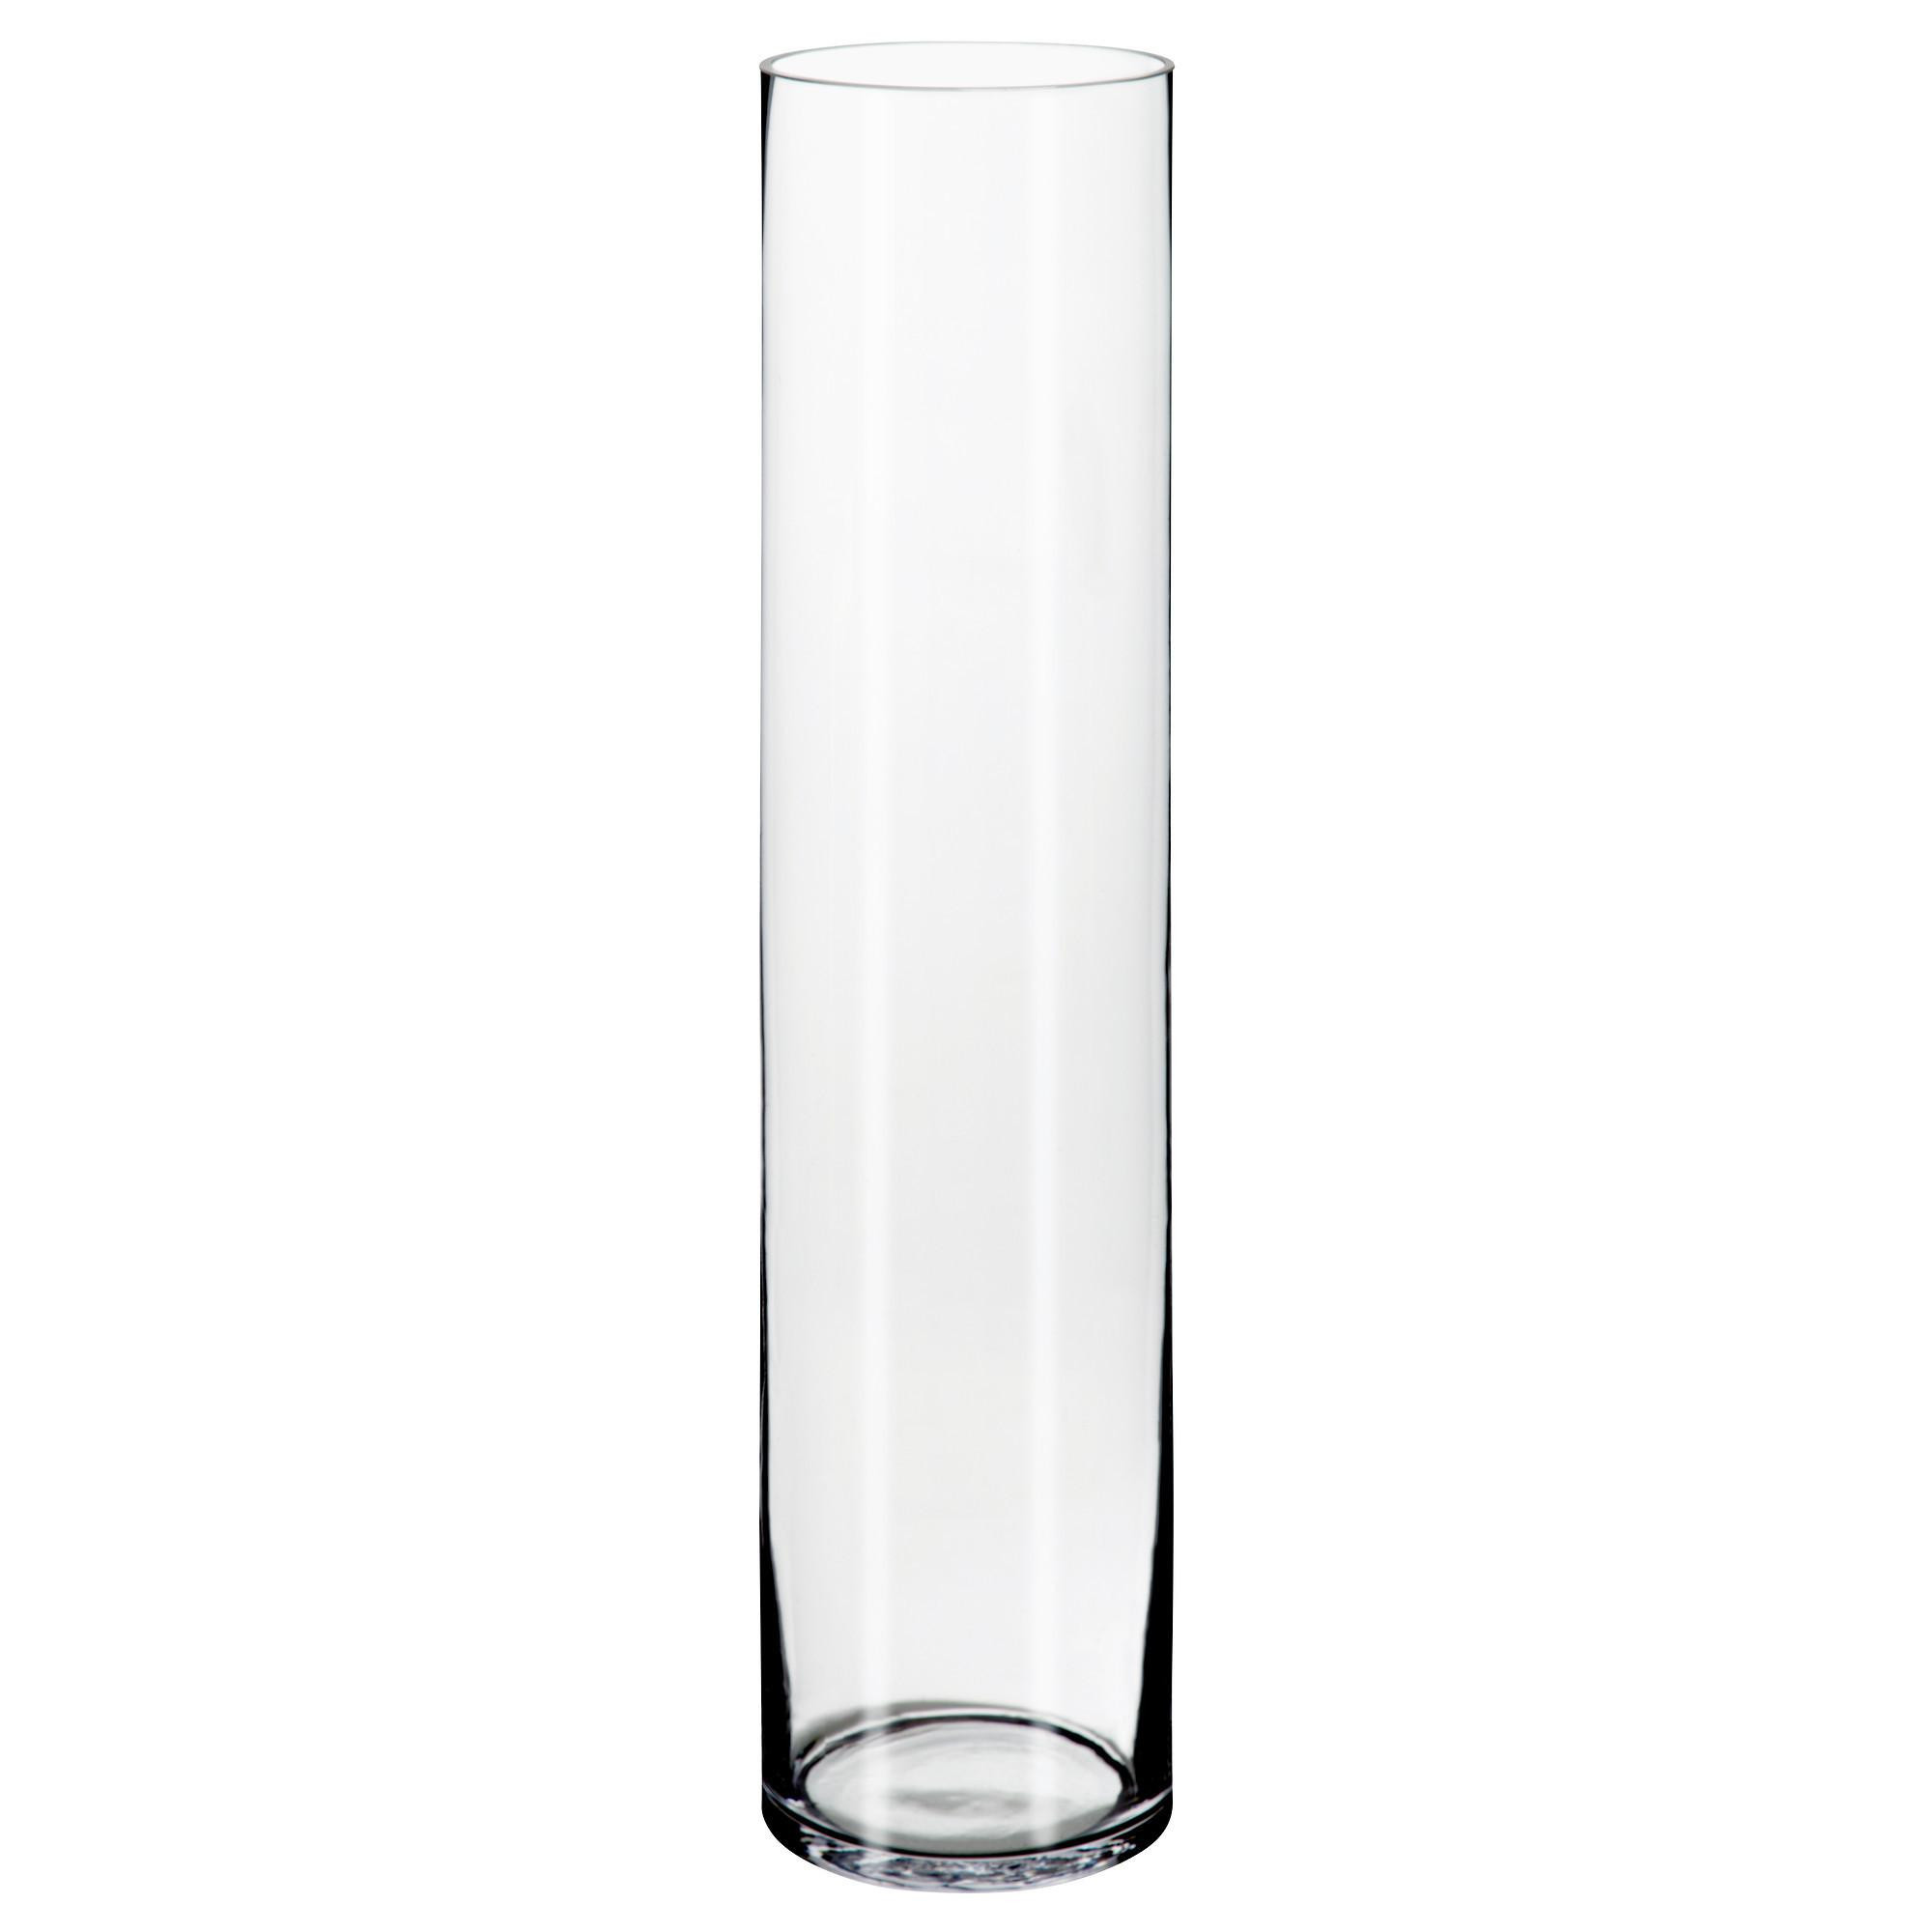 13 attractive White Floor Vase with Flowers 2022 free download white floor vase with flowers of living room addition best of living room vase glass fresh pe s5h with living room addition best of living room vase glass fresh pe s5h vases ikea floor vase